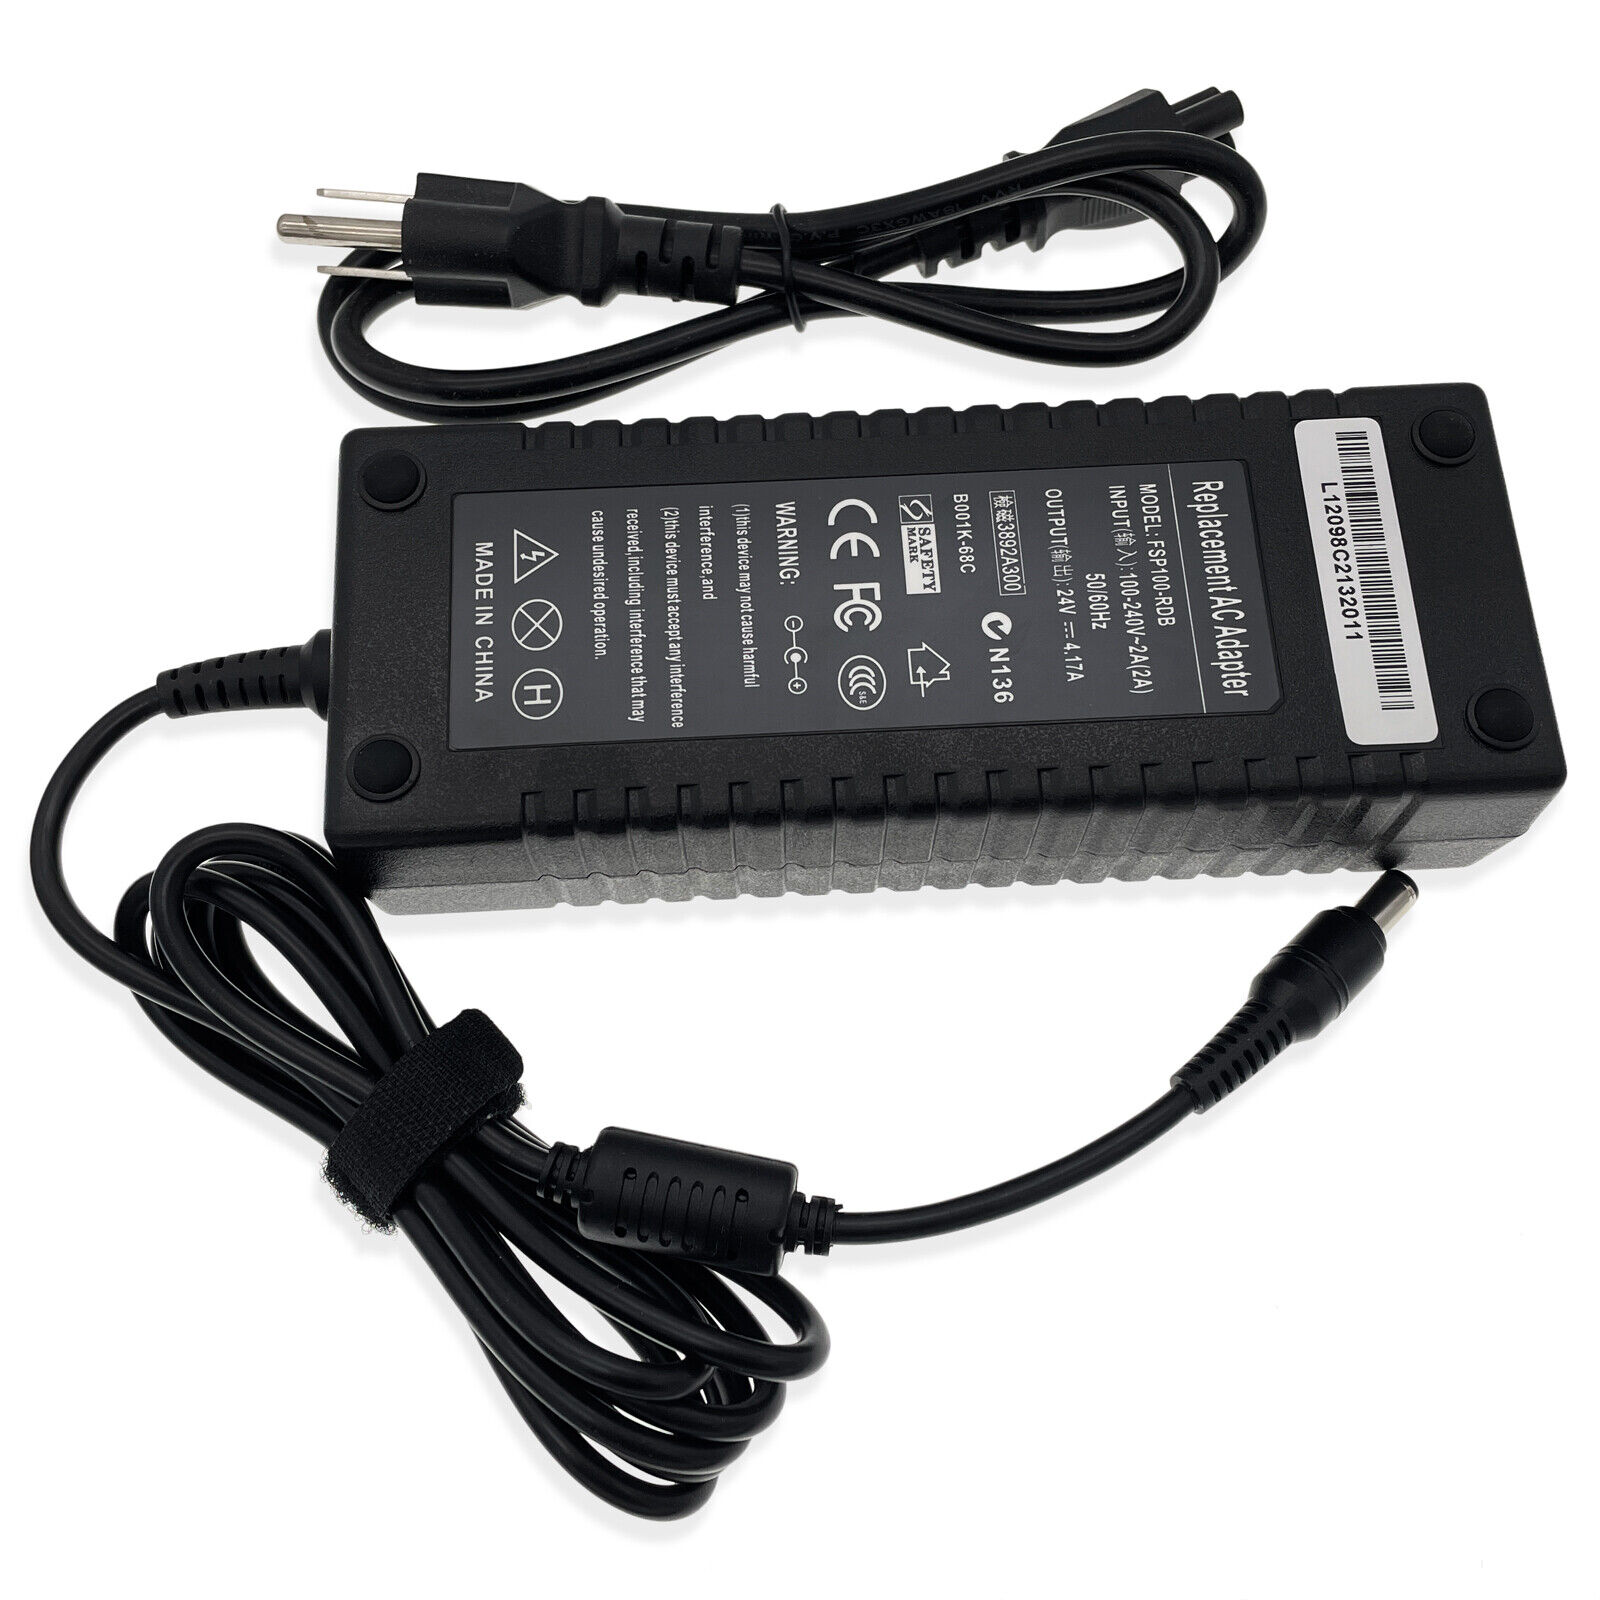 24V 4.17A AC Adapter Charger Power For Zebra FSP100-RDB P/N 808101-001 Printer Brand Unbranded/Generic Compatible Bran - Click Image to Close